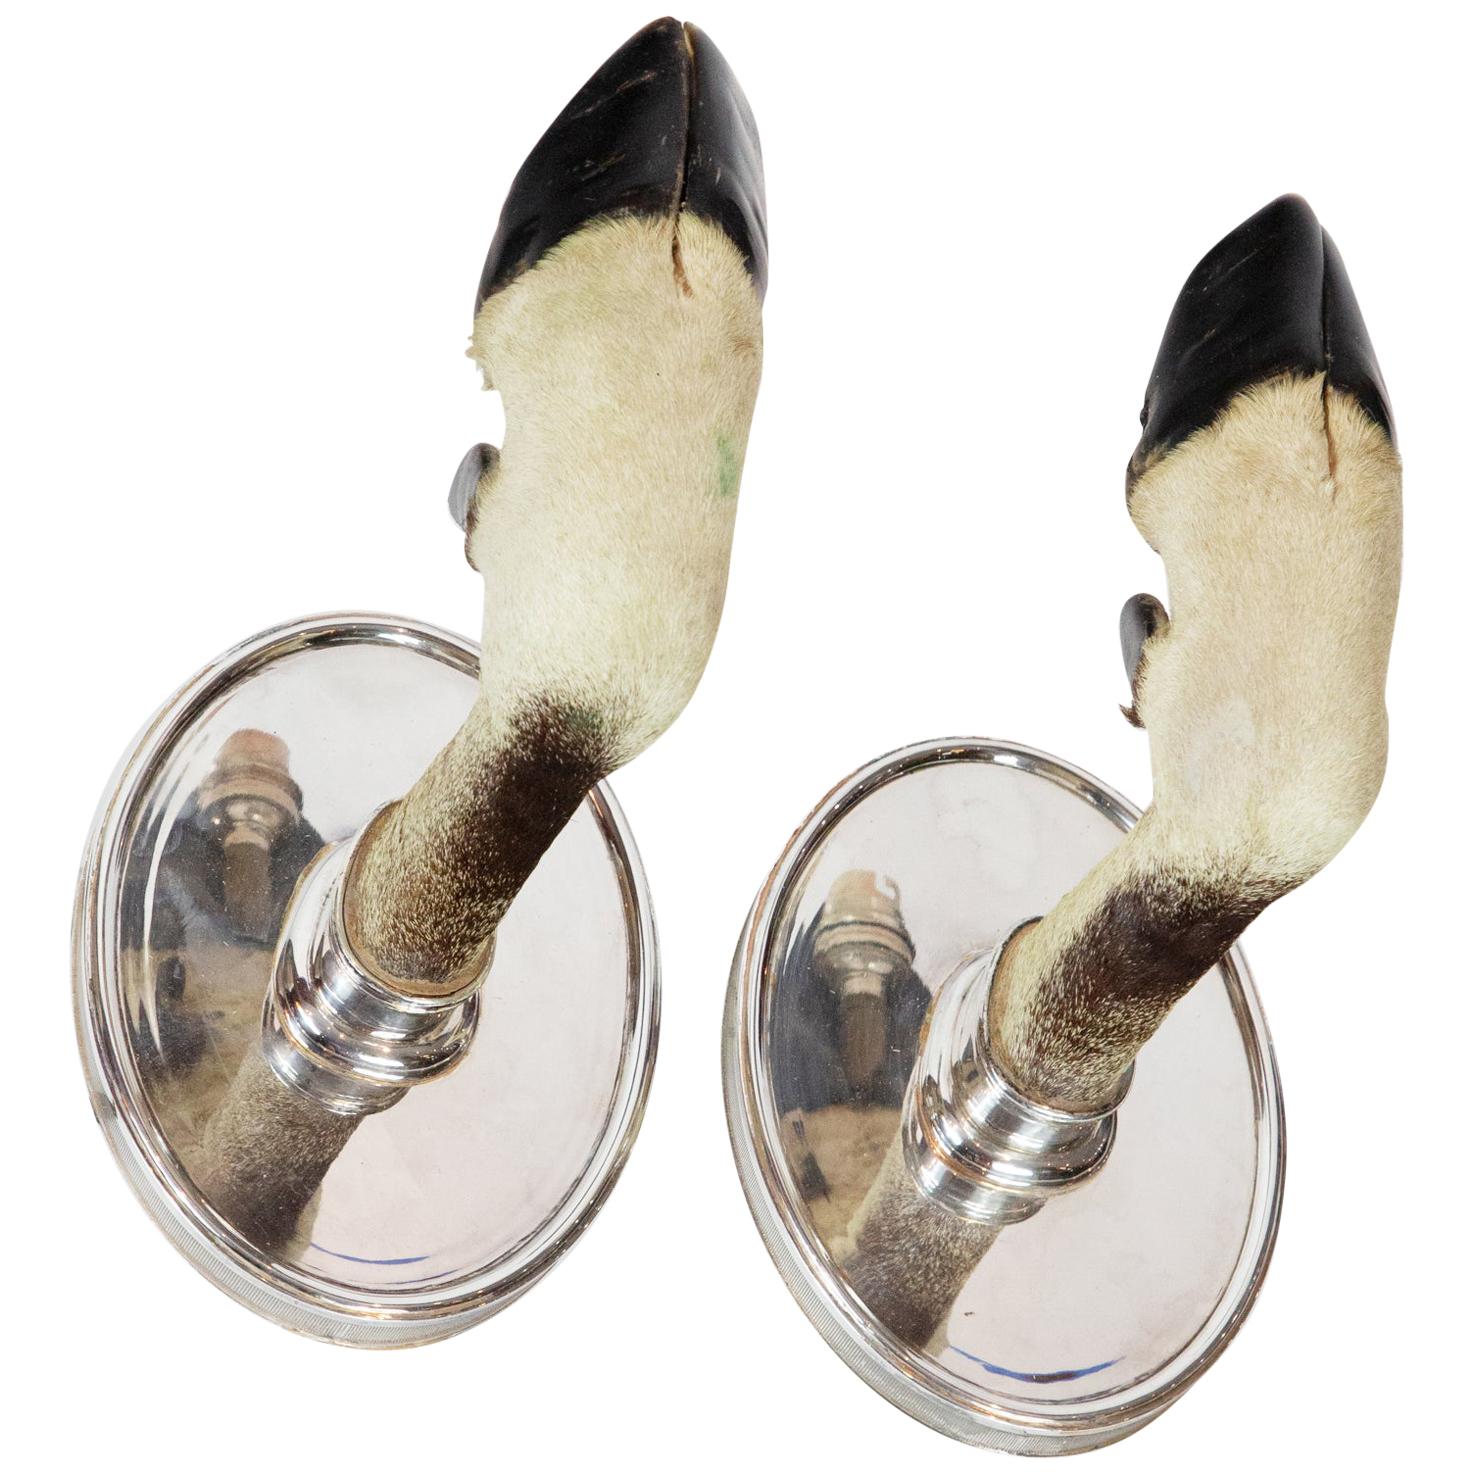 Pair of Antique Stag Hoof and Silver Plate Electrified Sconces